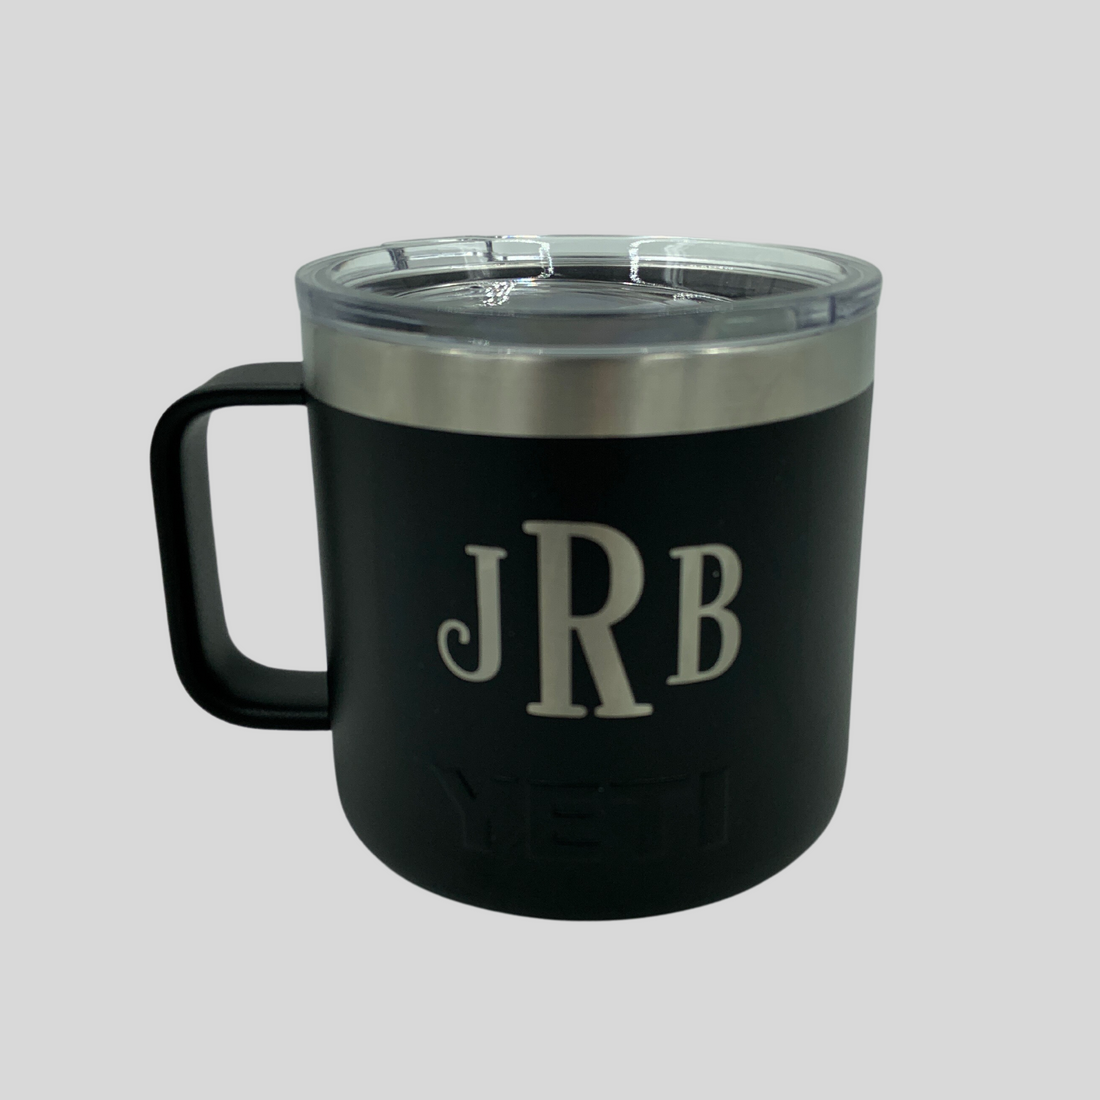 Personalized Engraved Rambler Tumblers, 40th Birthday, Yeti and